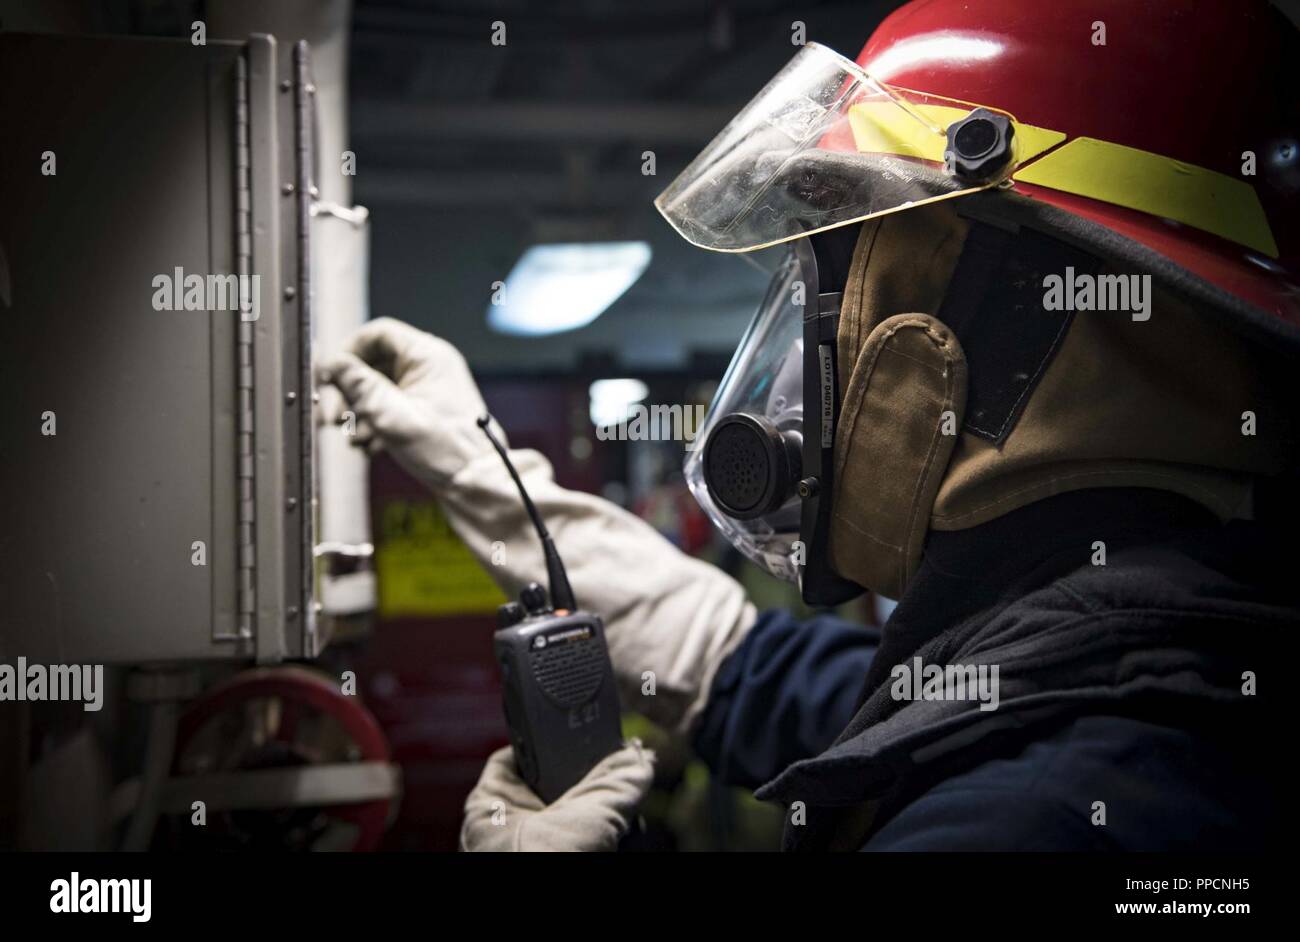 SEA (Aug. 31, 2018) Damage Controlman 2nd Class Kristopher Rejcek operates a ventilation panel during a general quarters drill aboard the Arleigh Burke-class guided-missile destroyer USS Carney (DDG 64) Aug. 31, 2018. Carney, forward-deployed to Rota, Spain, is on its fifth patrol in the U.S. 6th Fleet area of operations in support of regional allies and partners as well as U.S. national security interests in Europe and Africa. Stock Photo